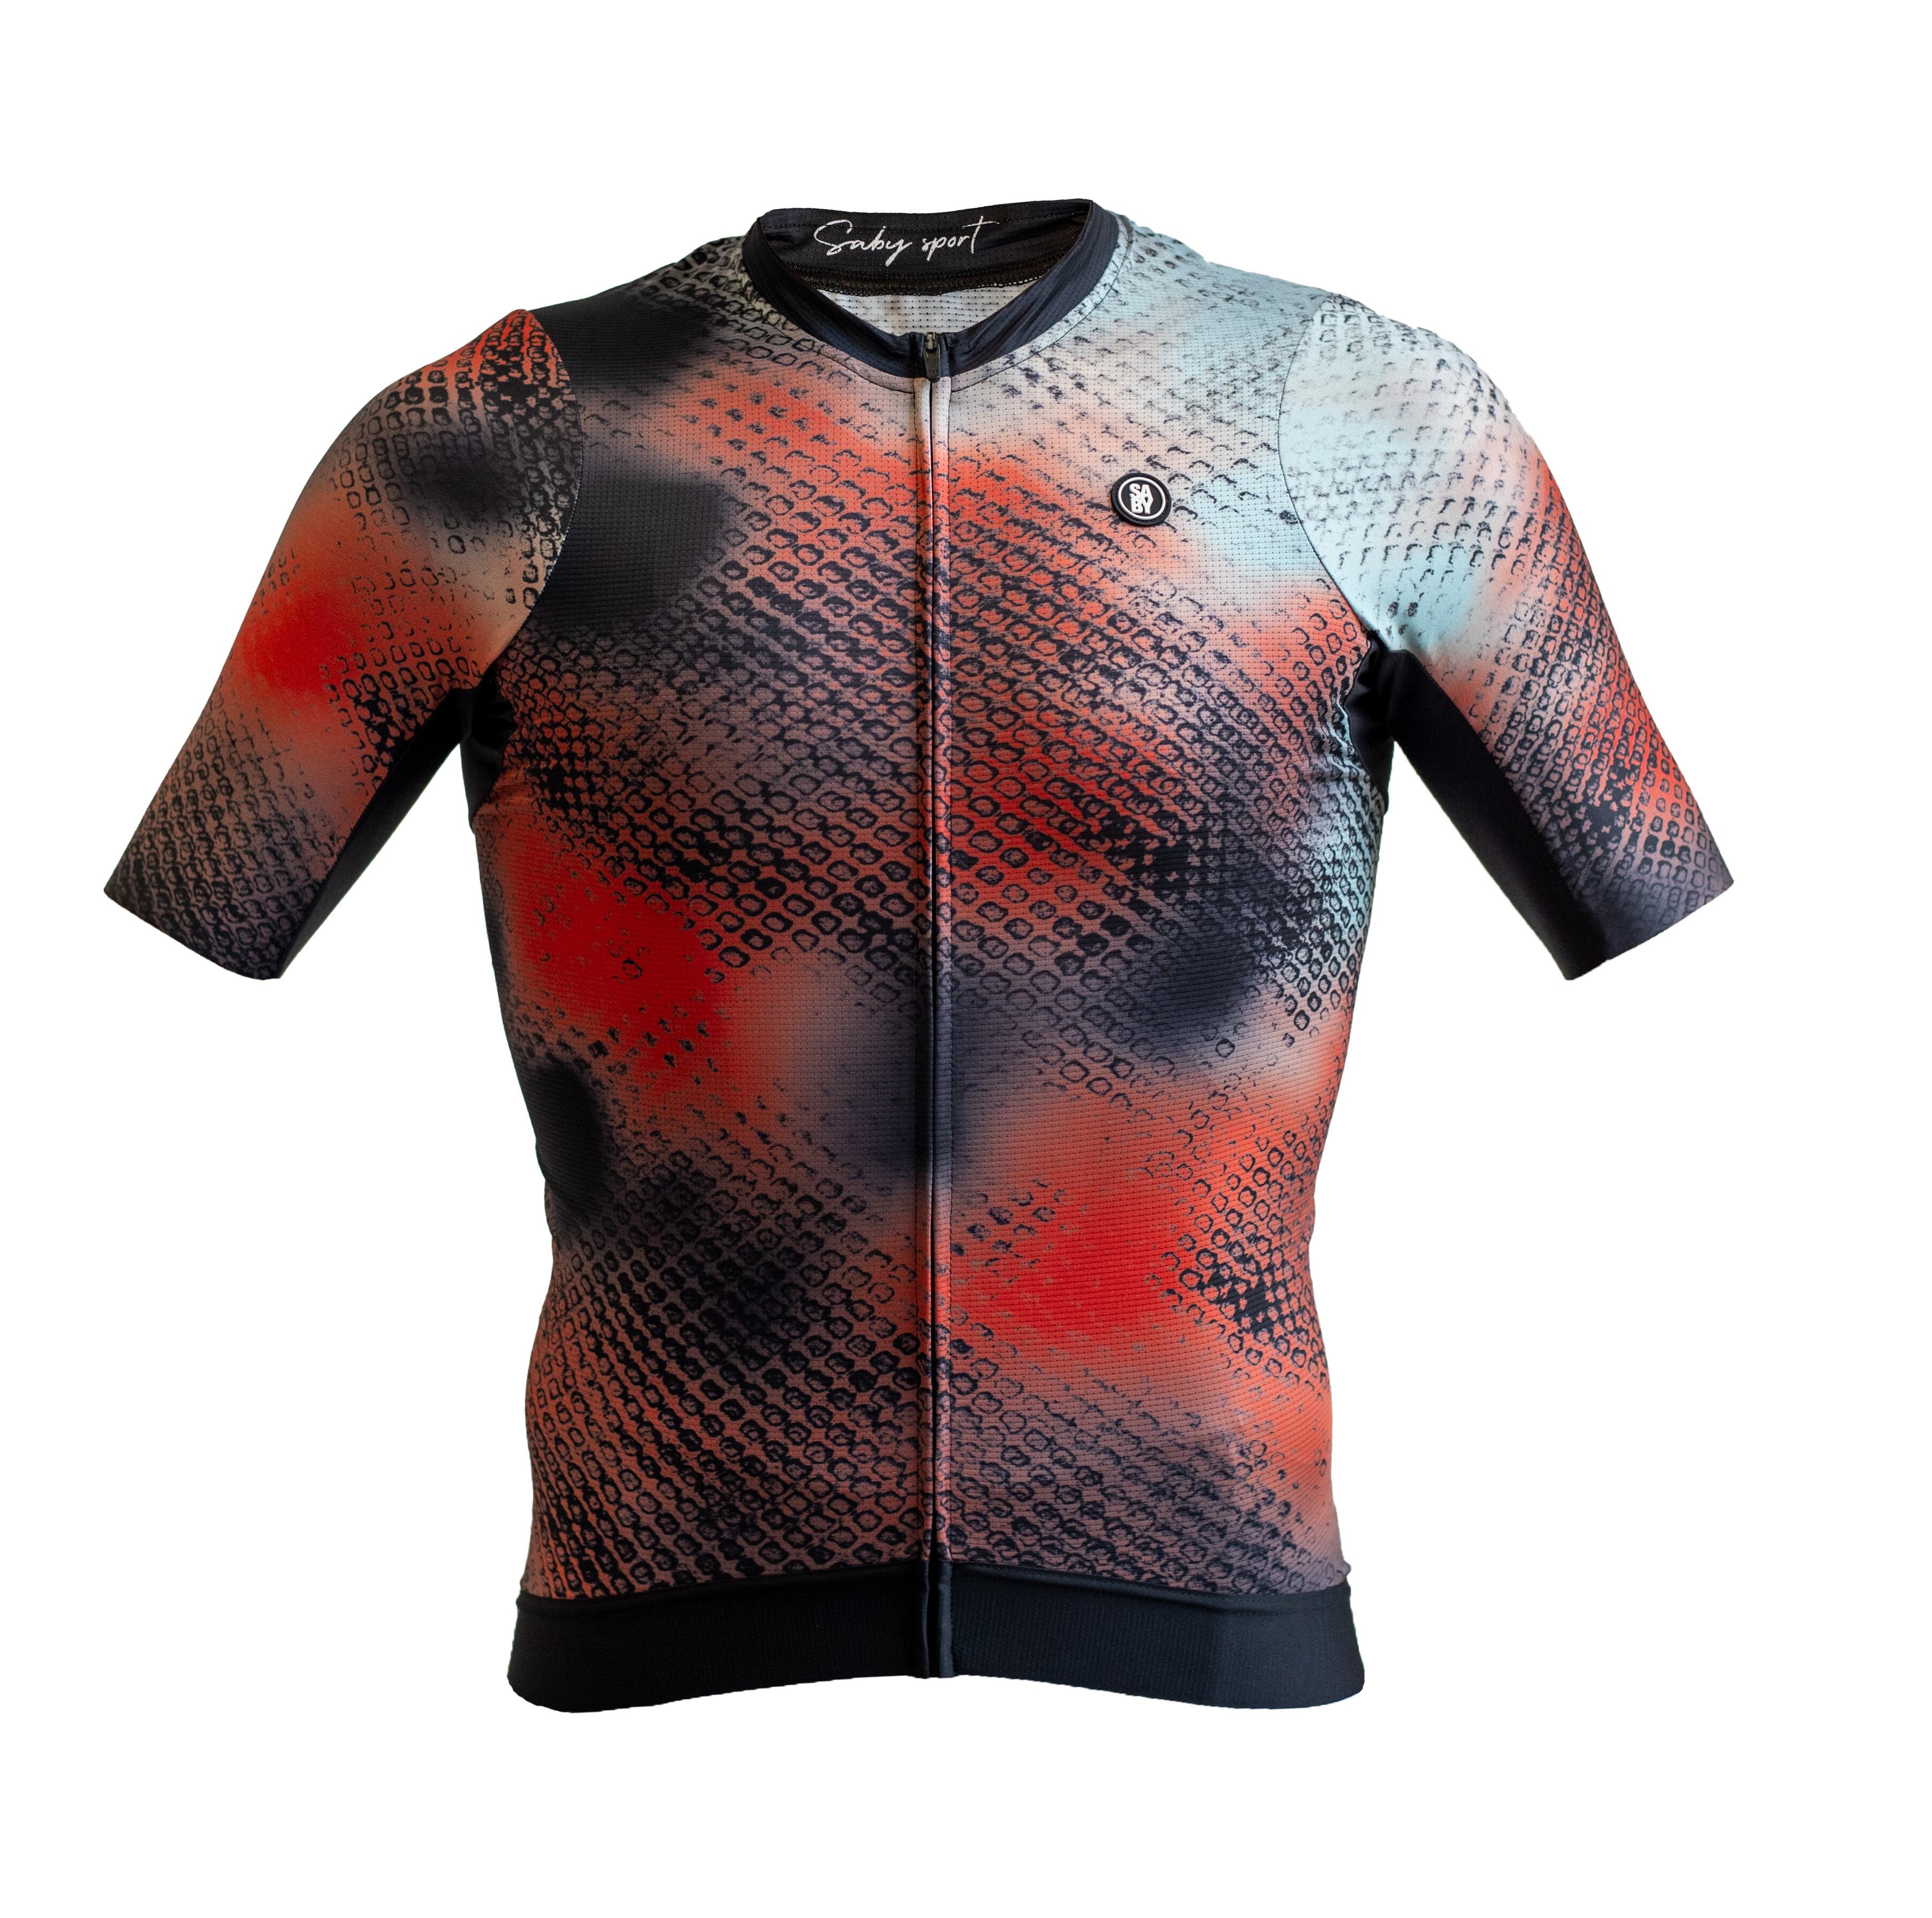 Maglia Limited Edition Snakeskin